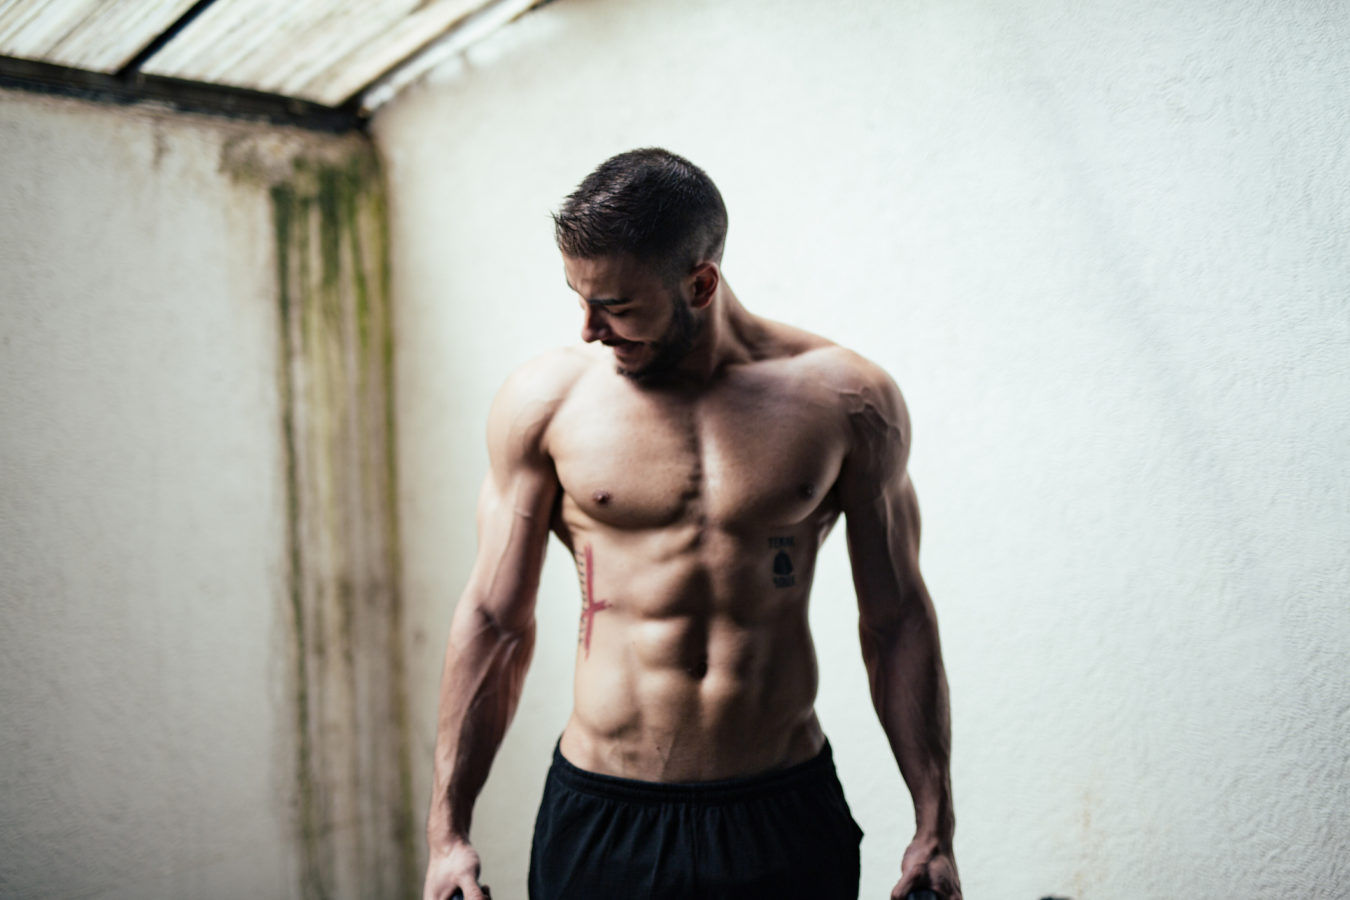 Here is why you should not aim for 6-pack abs